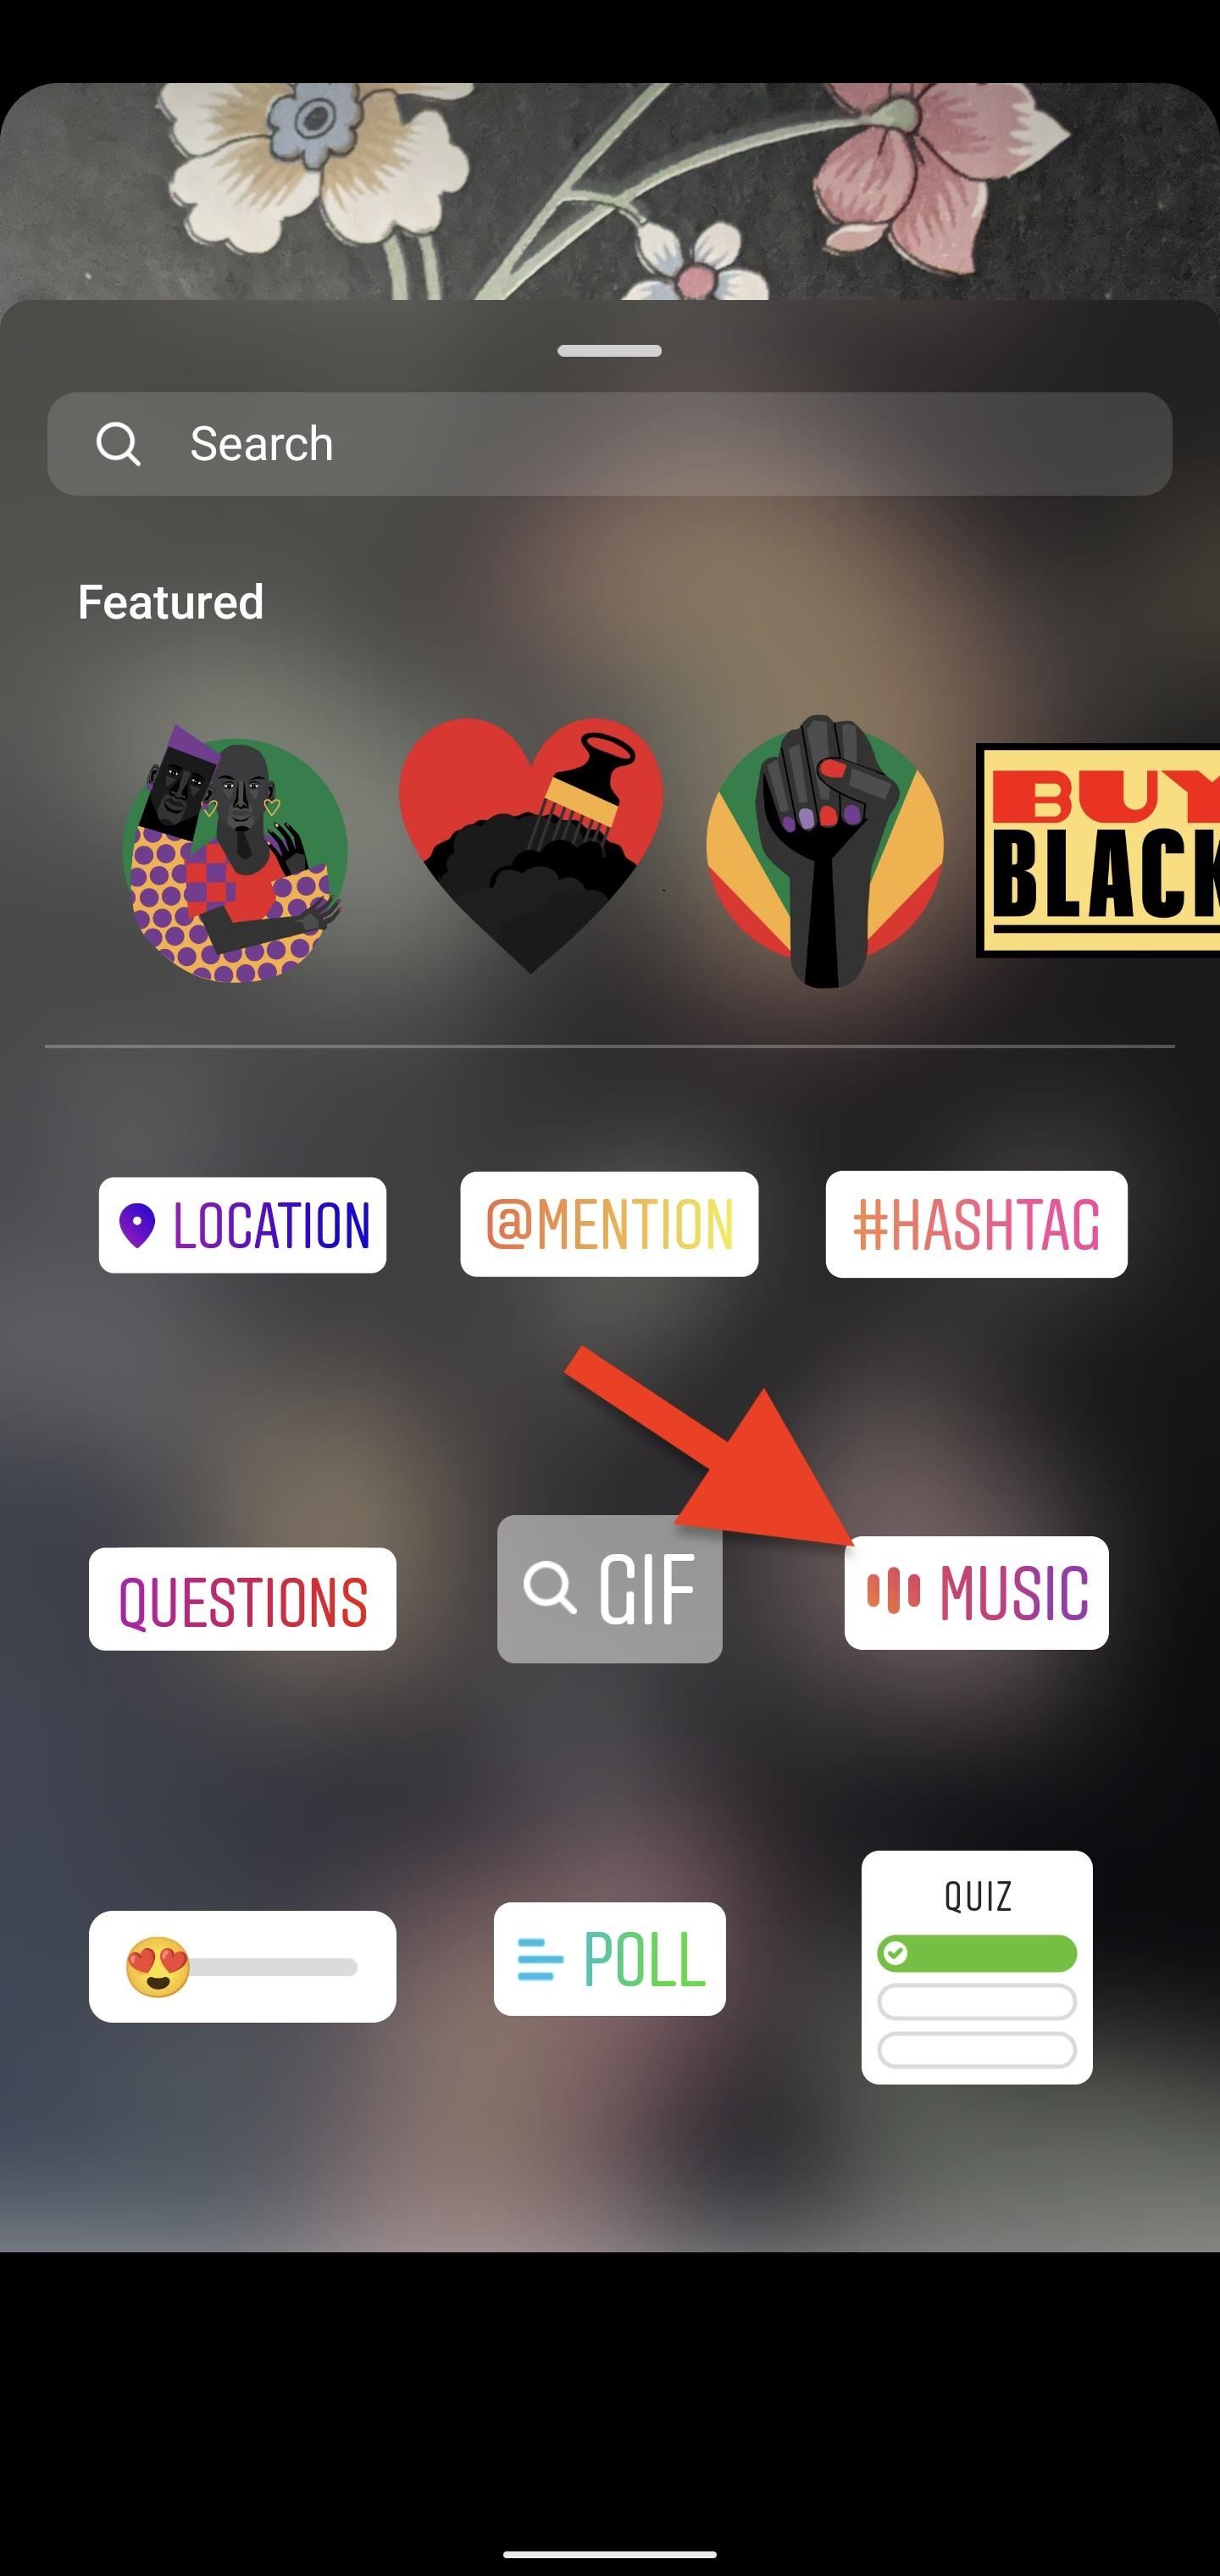 How to Add Your Favorite Songs and Other Music to Instagram Stories